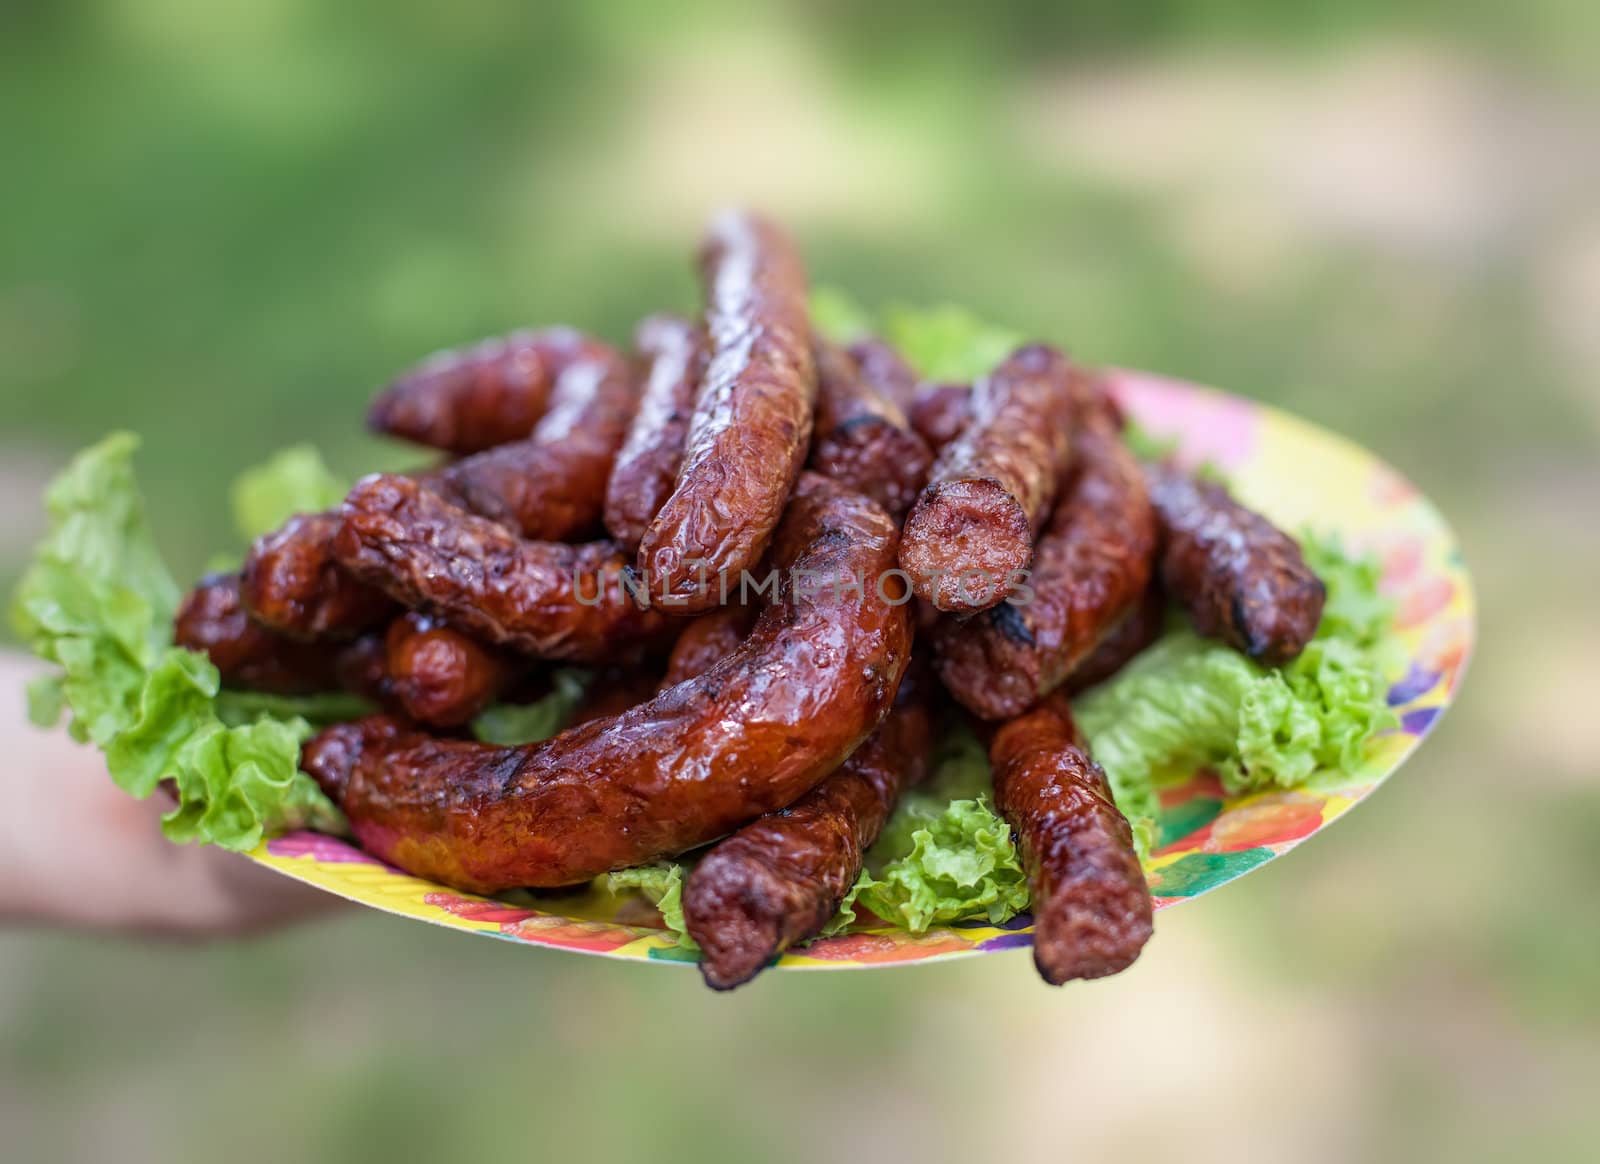 Grilled sausages on a plate with salad on a soft background